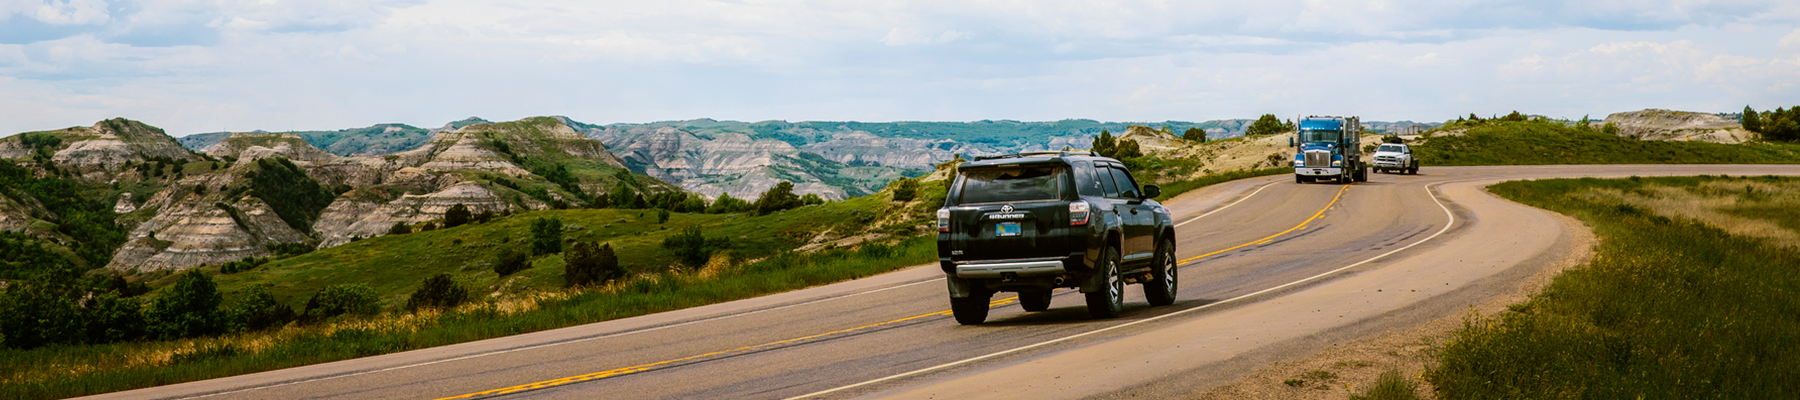 SUV drives on a road in Theodore Roosevelt National Park.